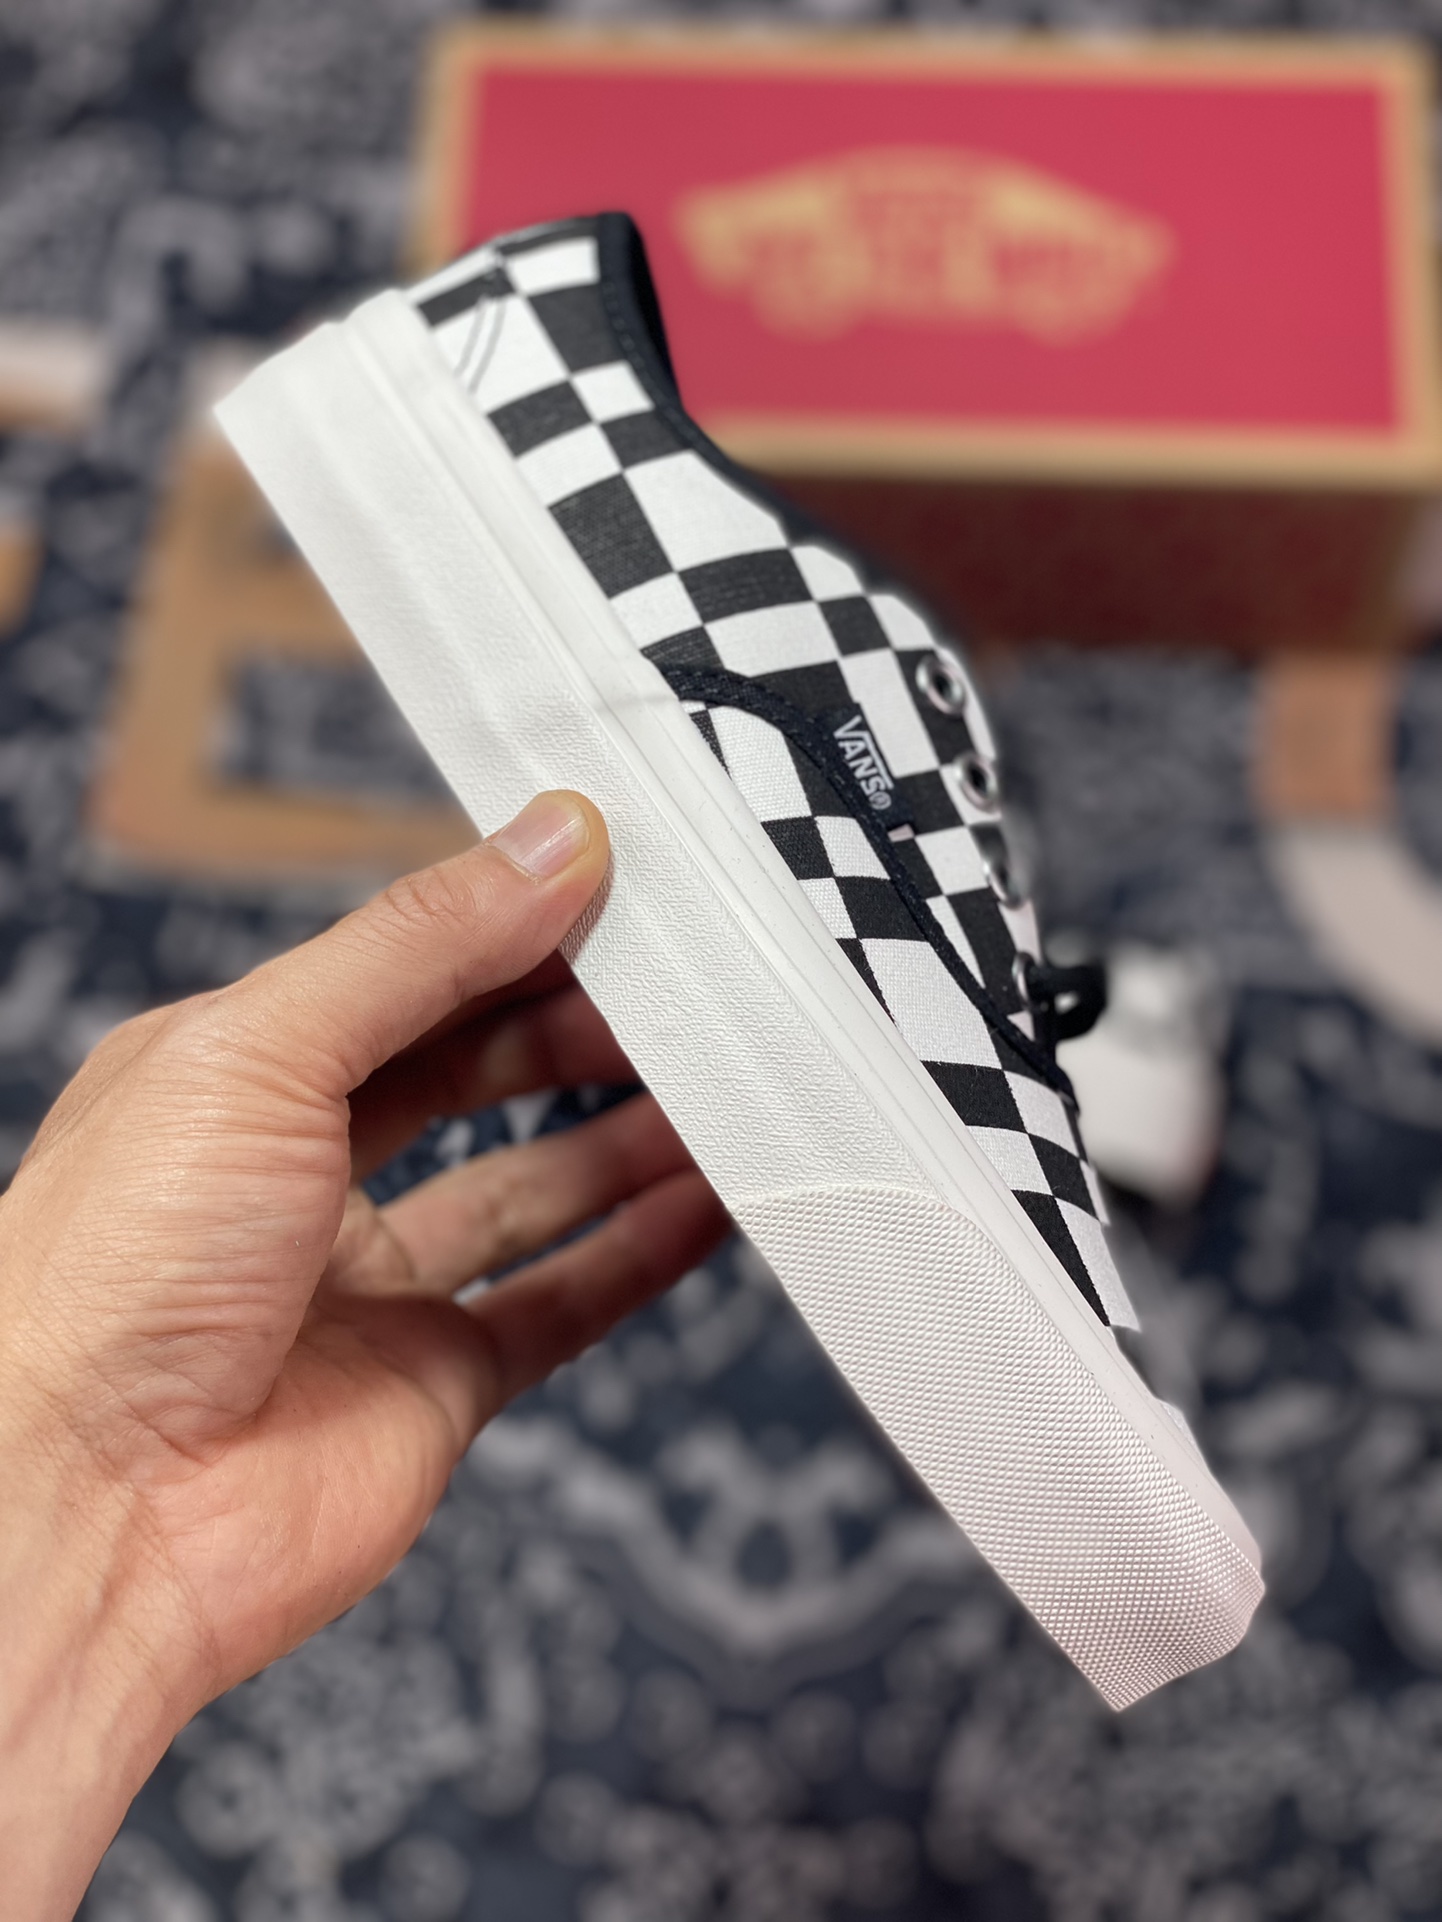 Vans Woven Check Authentic 44 DX Vans official irregular checkerboard pattern sneakers